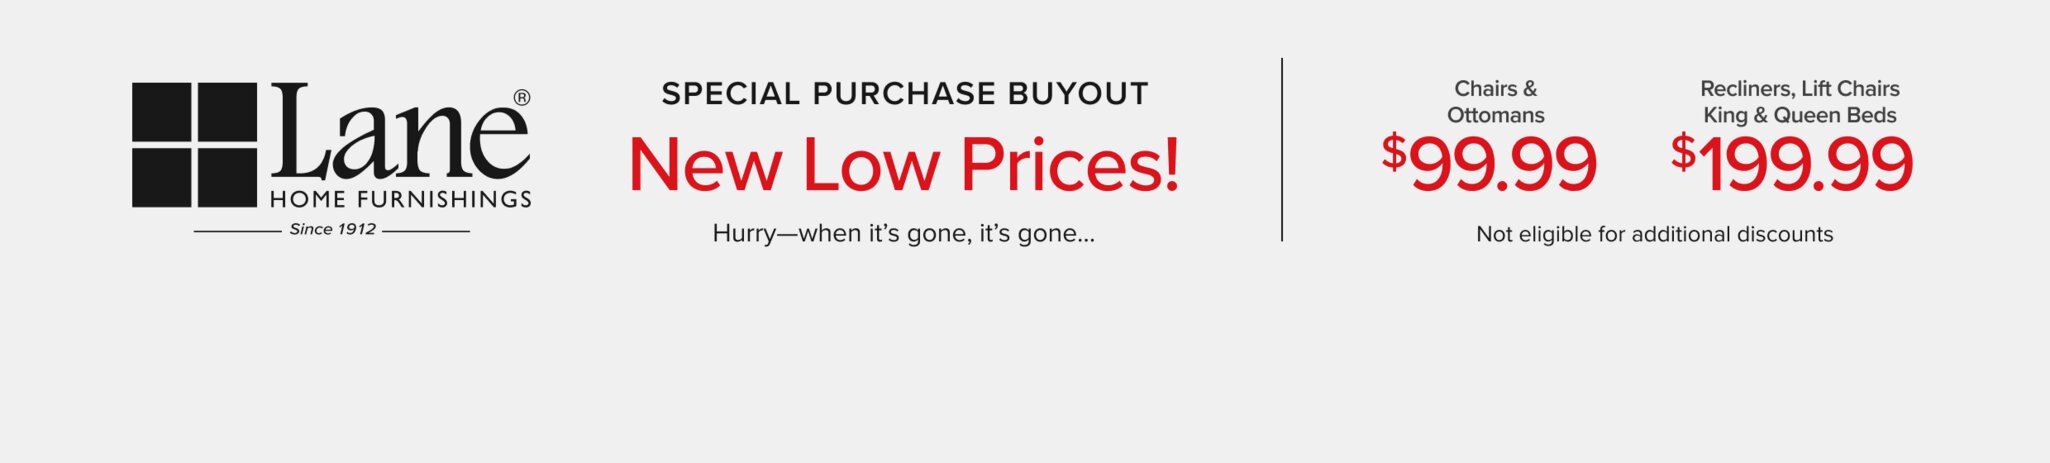 Special Purchase Buyout, New Low Prices!